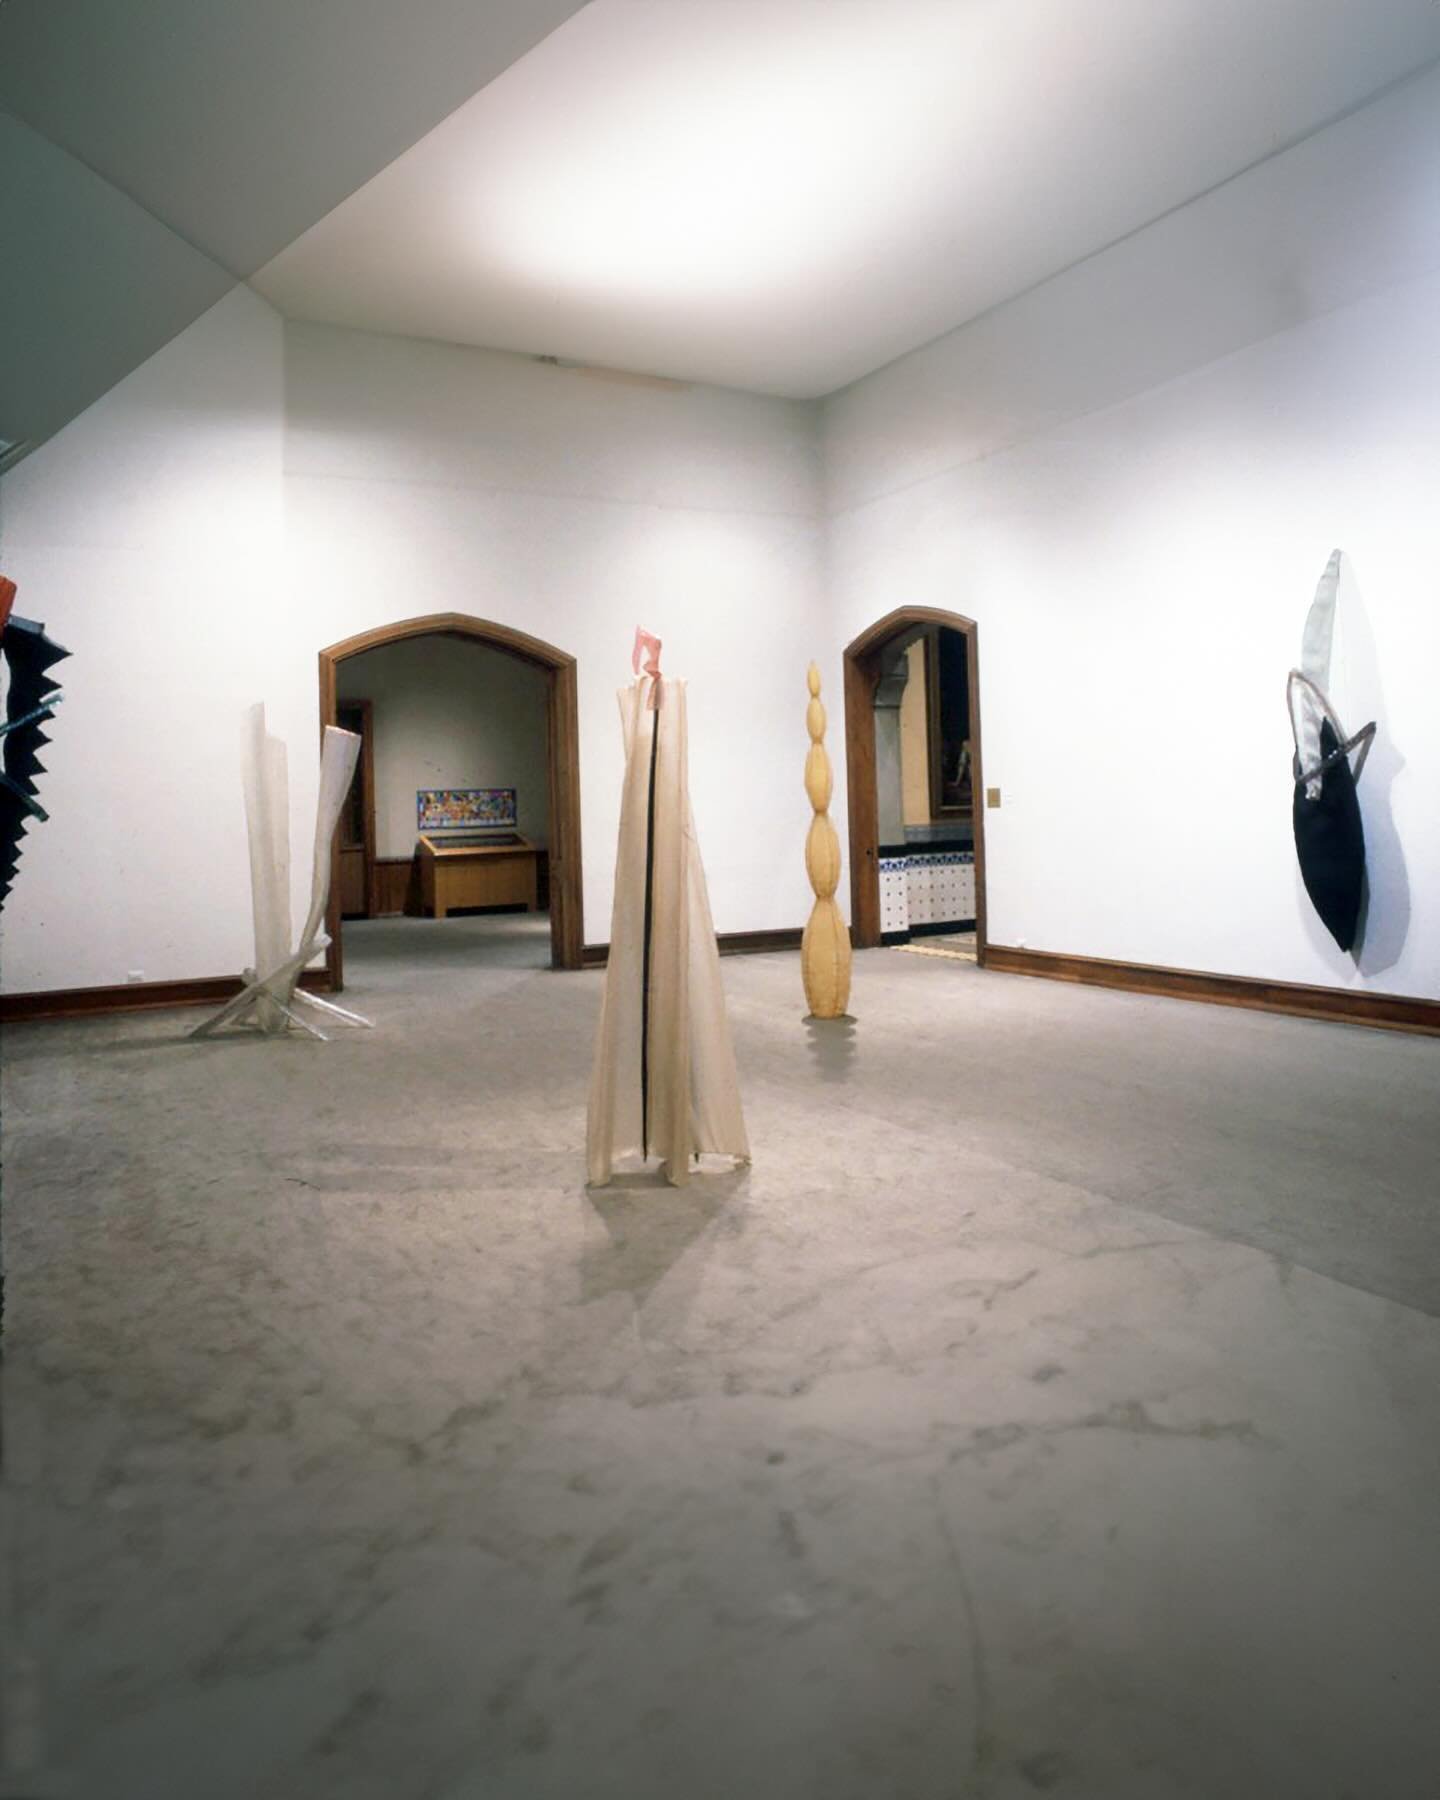 Solo show- Pennsylvania Academy of Fine Arts 1985, Morris Gallery, 
view 1. swipe to view from left to right: S.C., A.K., T.C.B., S.H.

S.C. 1985
h. 7&rsquo; 9&rdquo;
fiberglass, dyes
#tombutter 
#artofthe&rsquo;80&rsquo;s 
#somehowcleaved

A.K. 1984